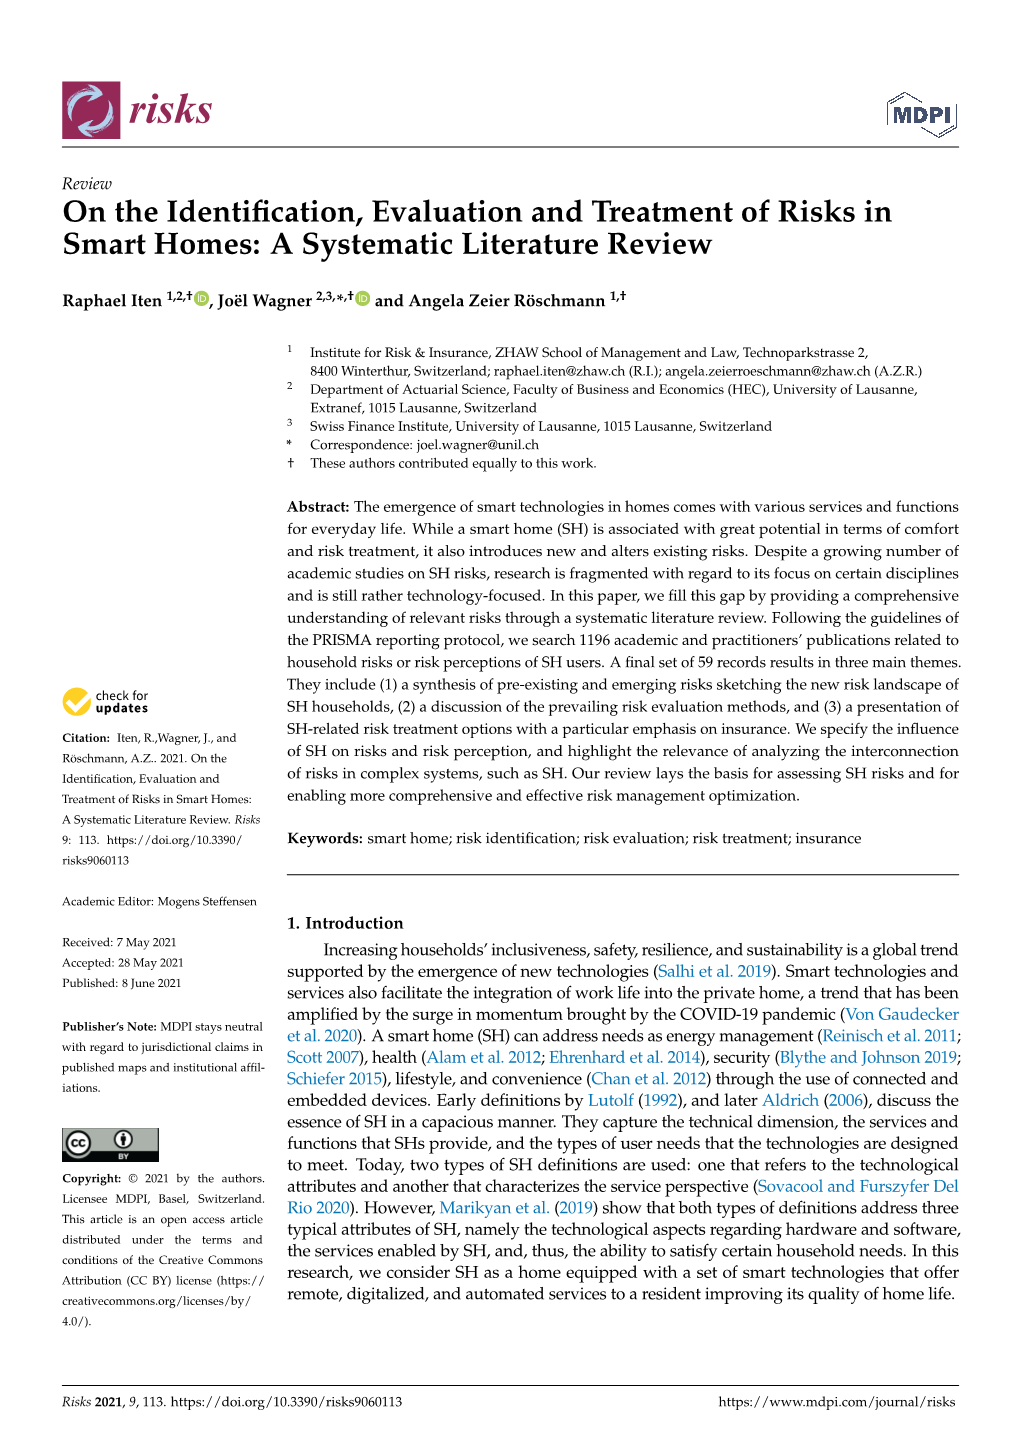 On the Identification, Evaluation and Treatment of Risks in Smart Homes